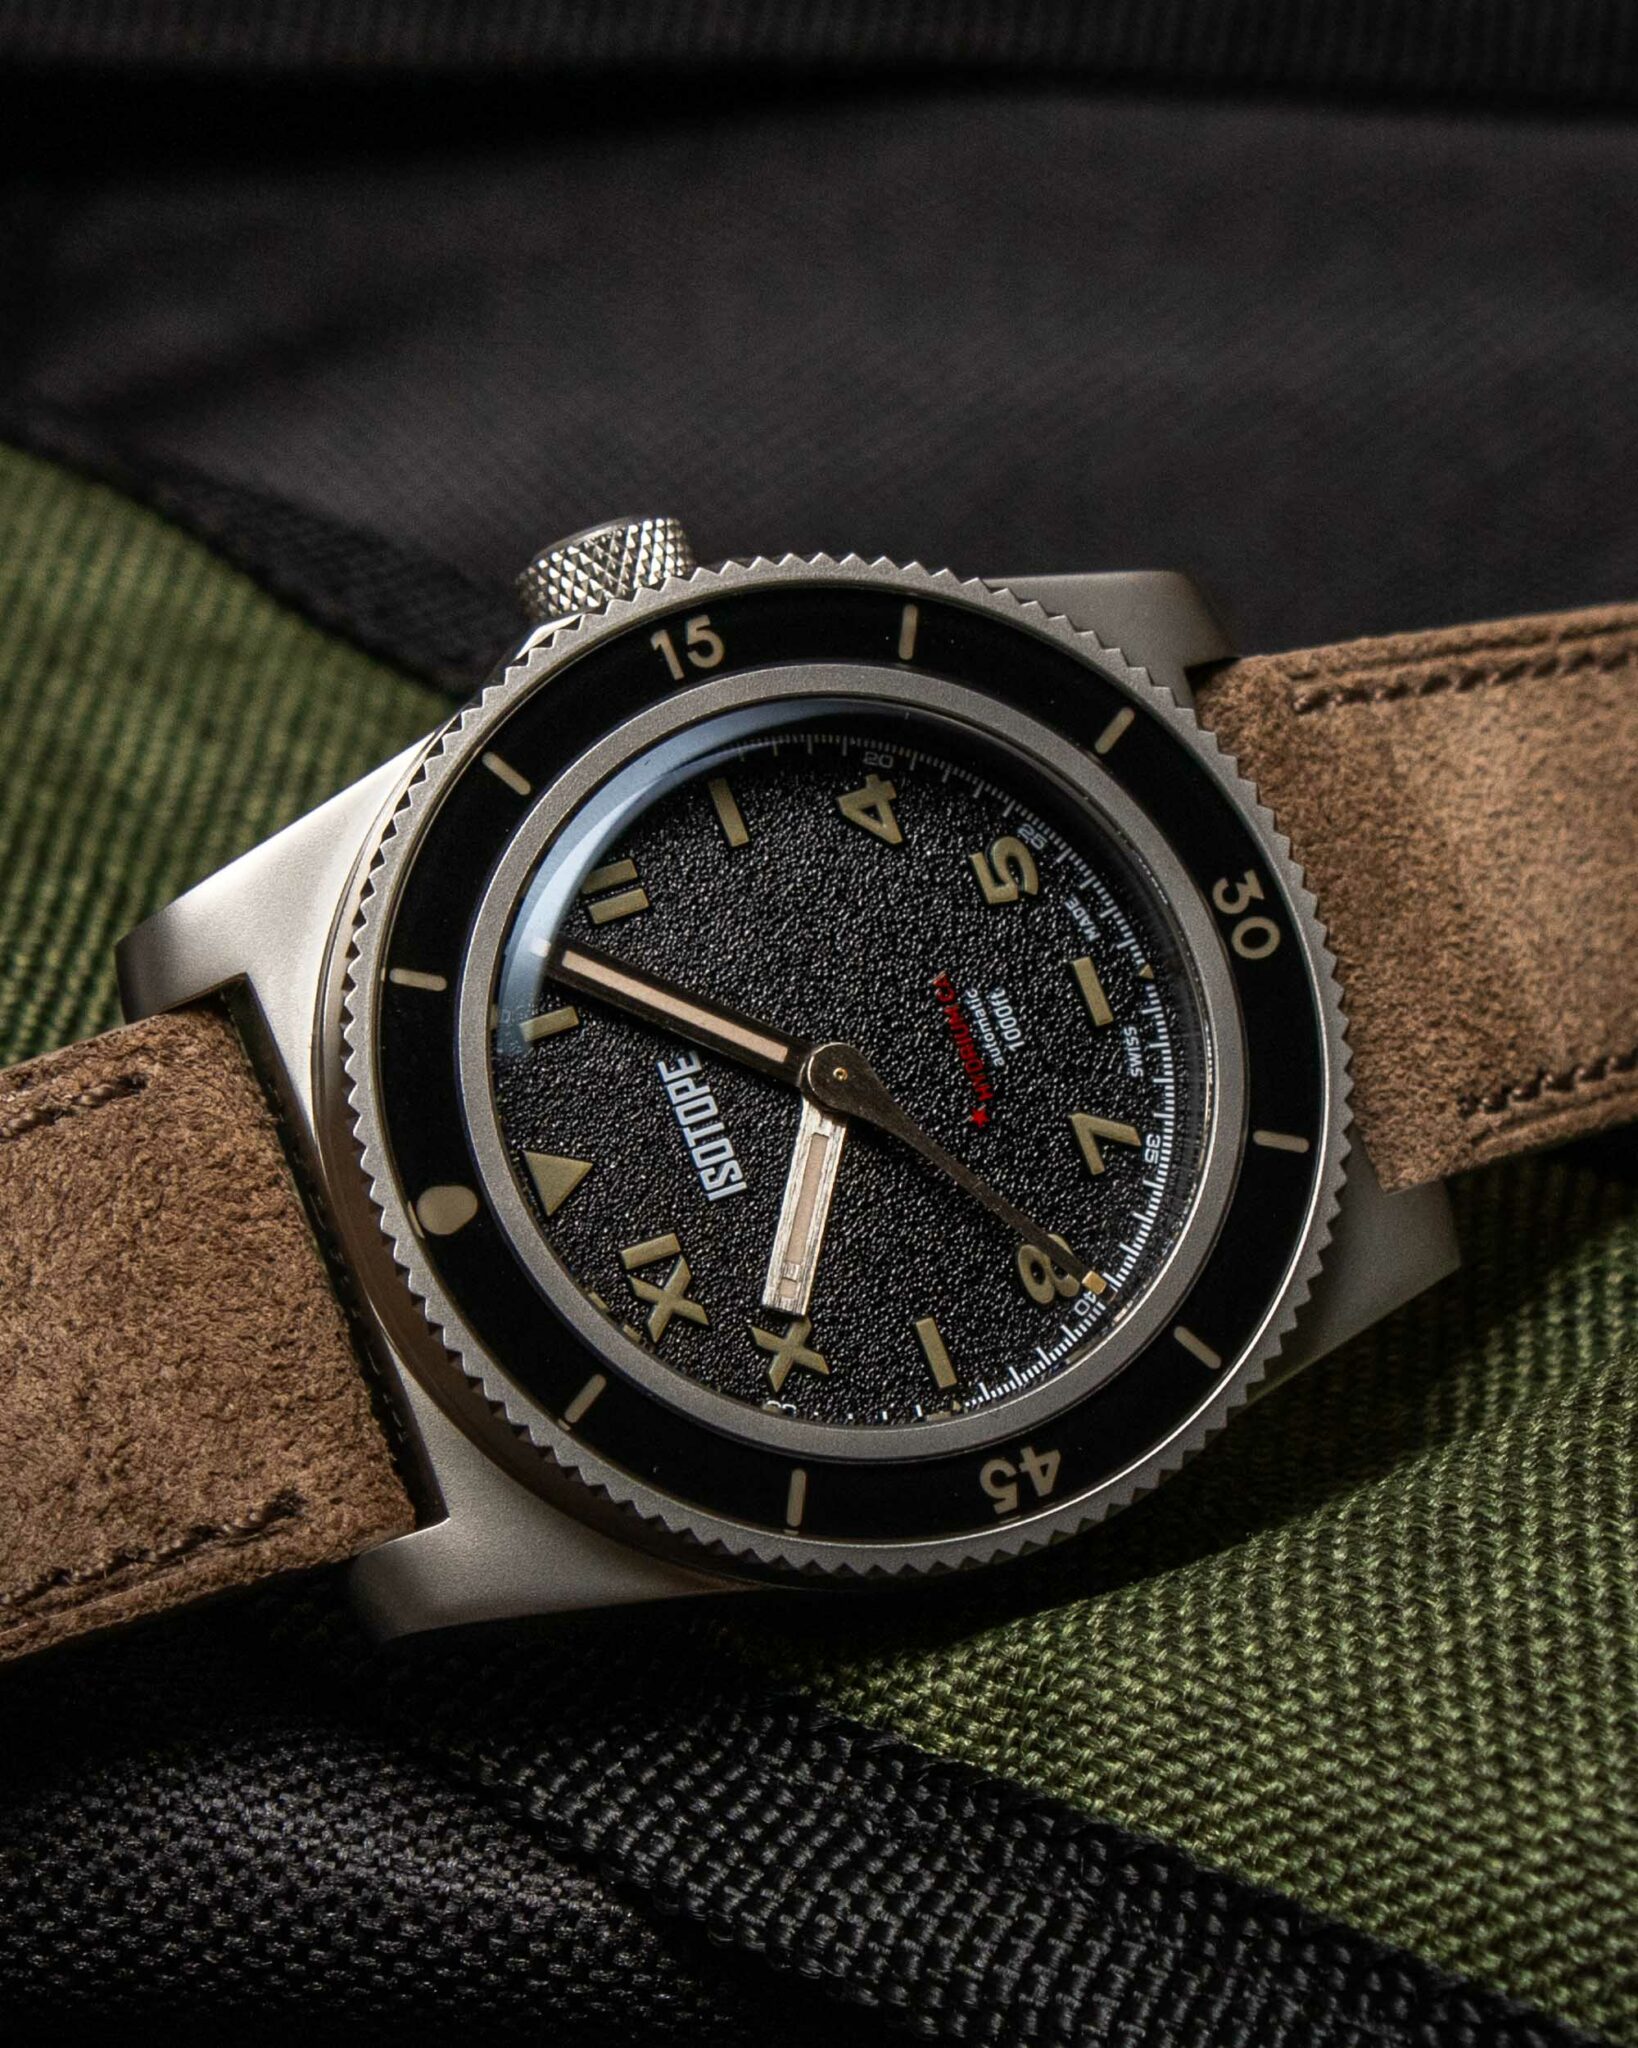 Hands-On Debut: Isotope Hydrium California Watch | aBlogtoWatch